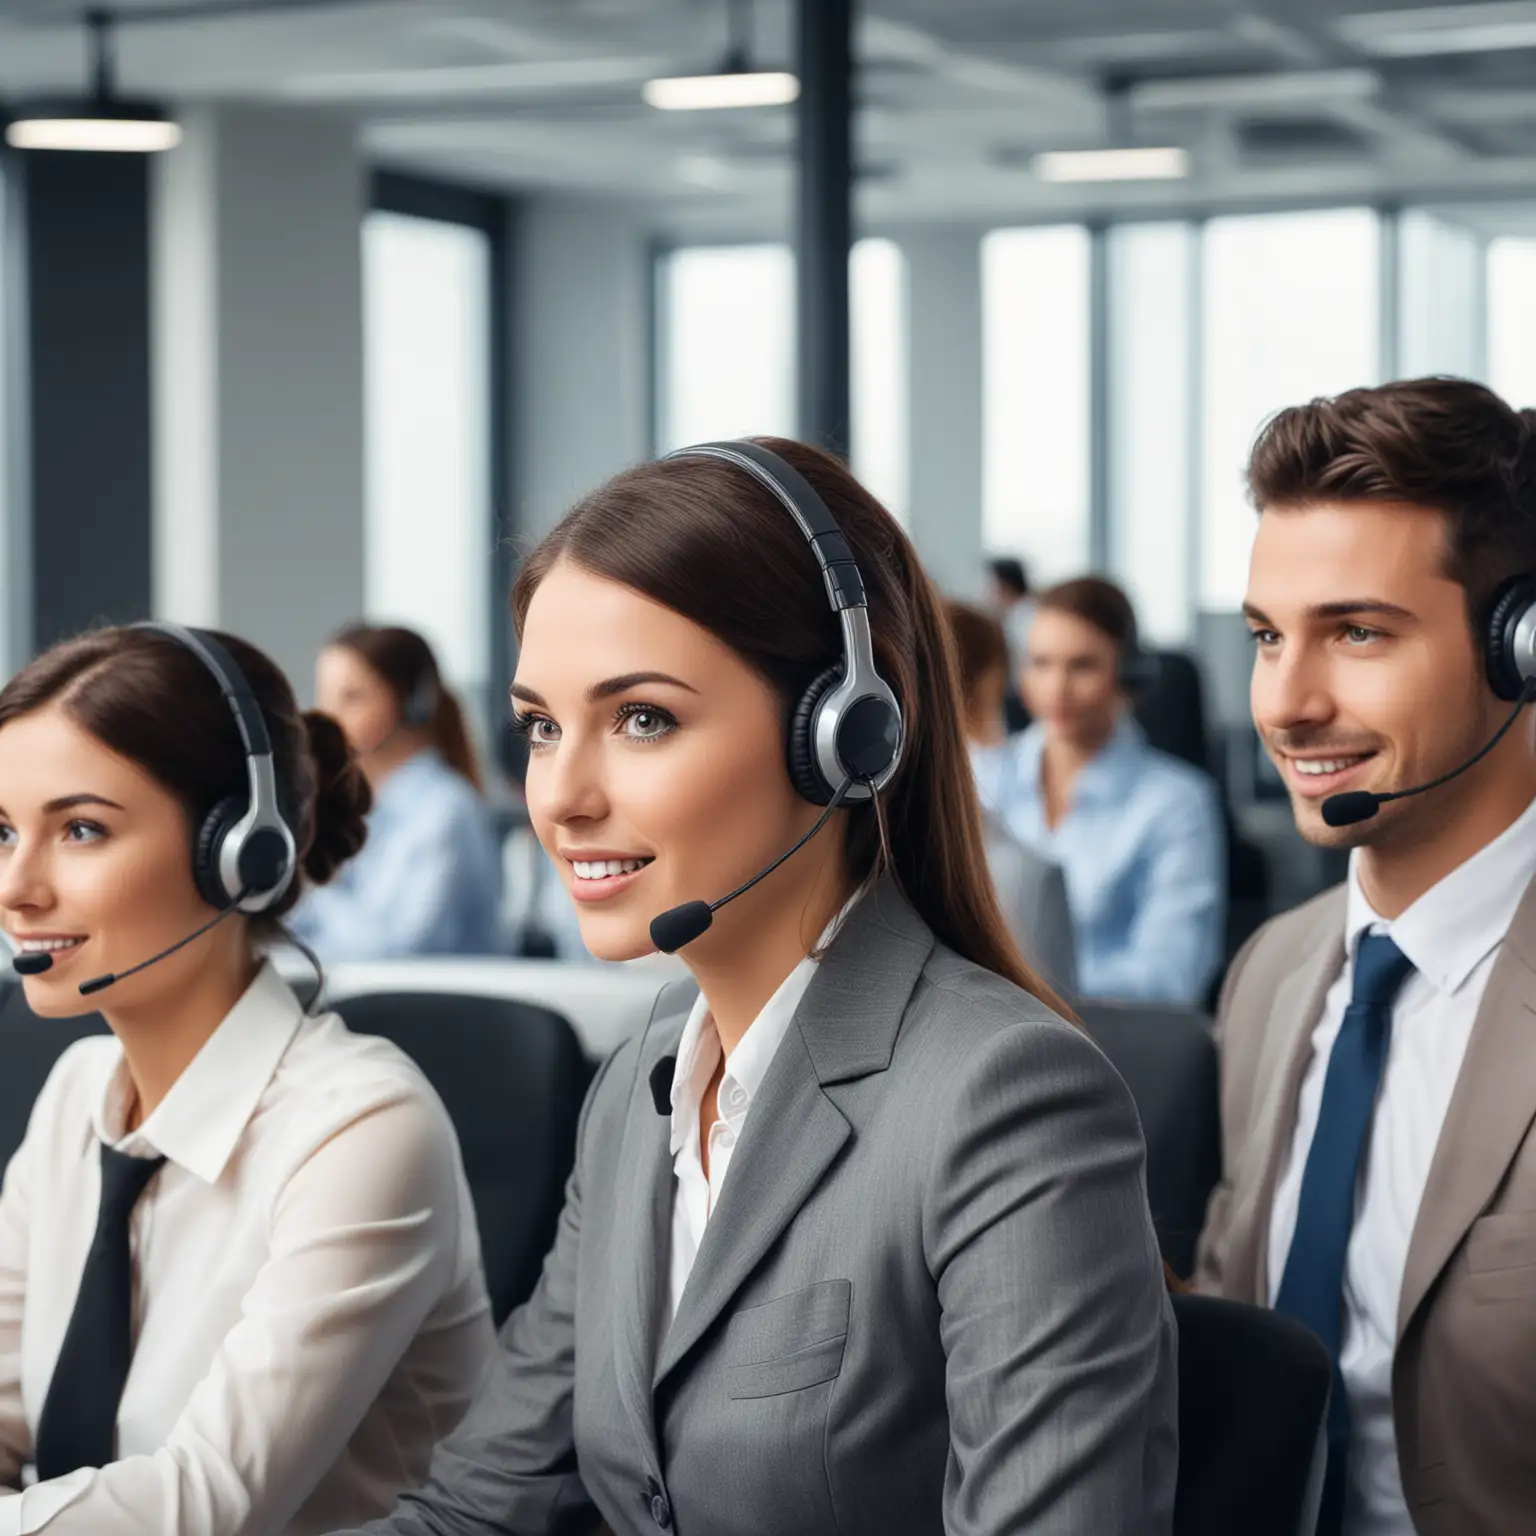 Realistic Agents in a Modern Contact Center